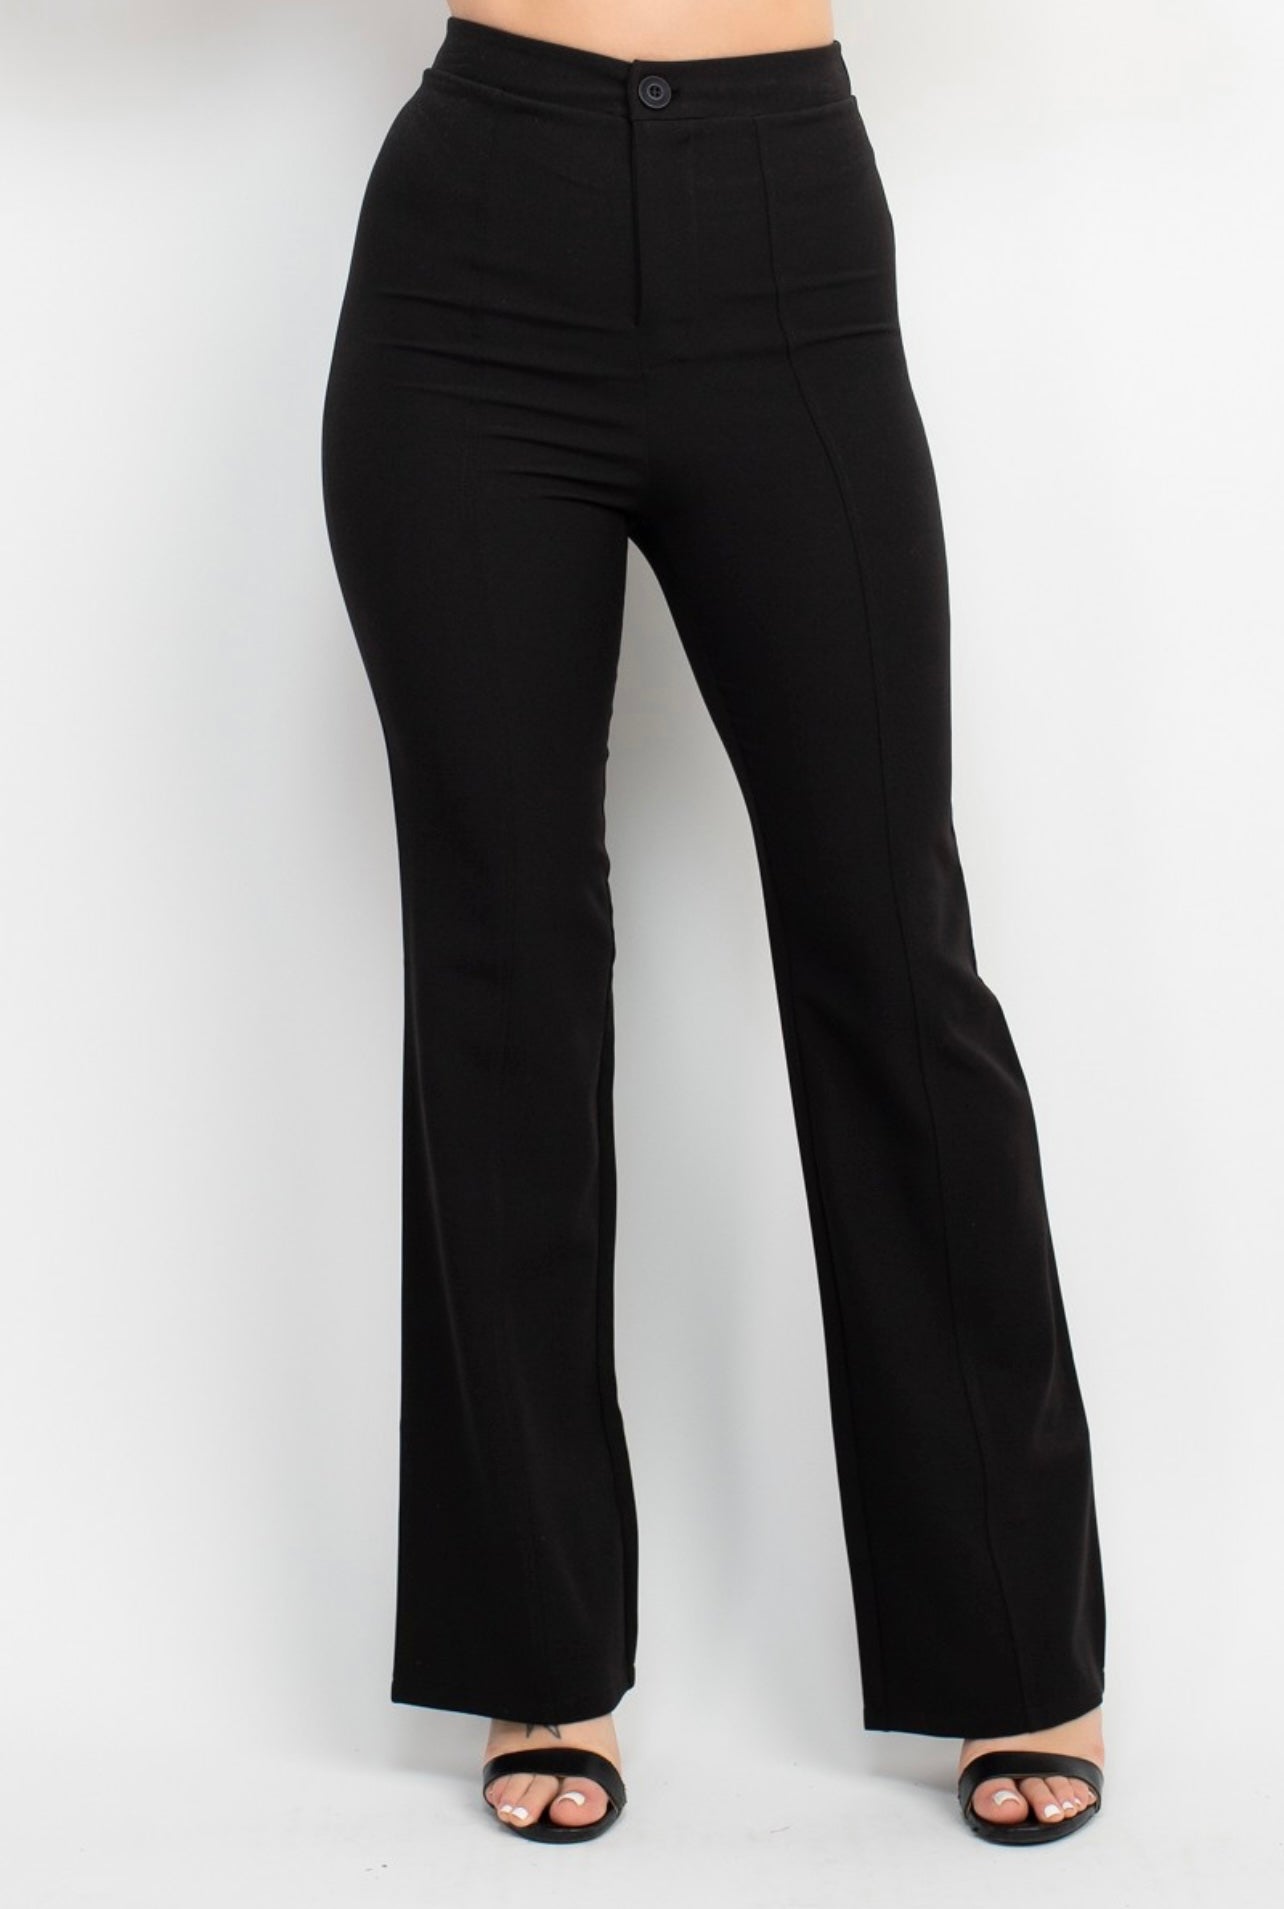 Lexy Fit Flare Pants (Black)